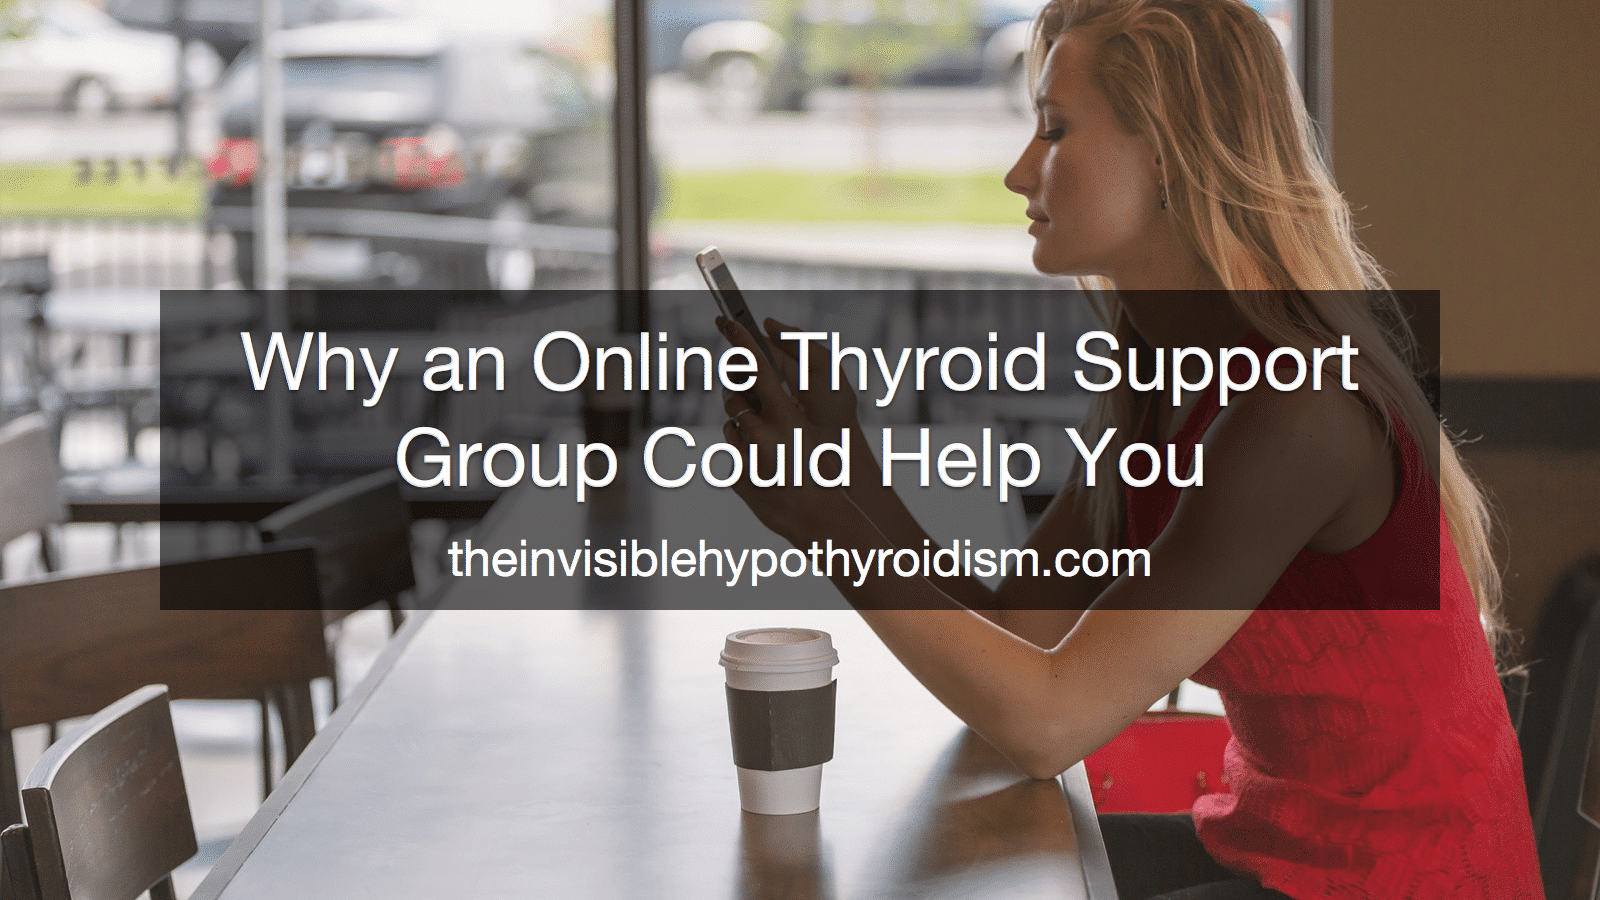 Why an Online Thyroid Support Group Could Help You